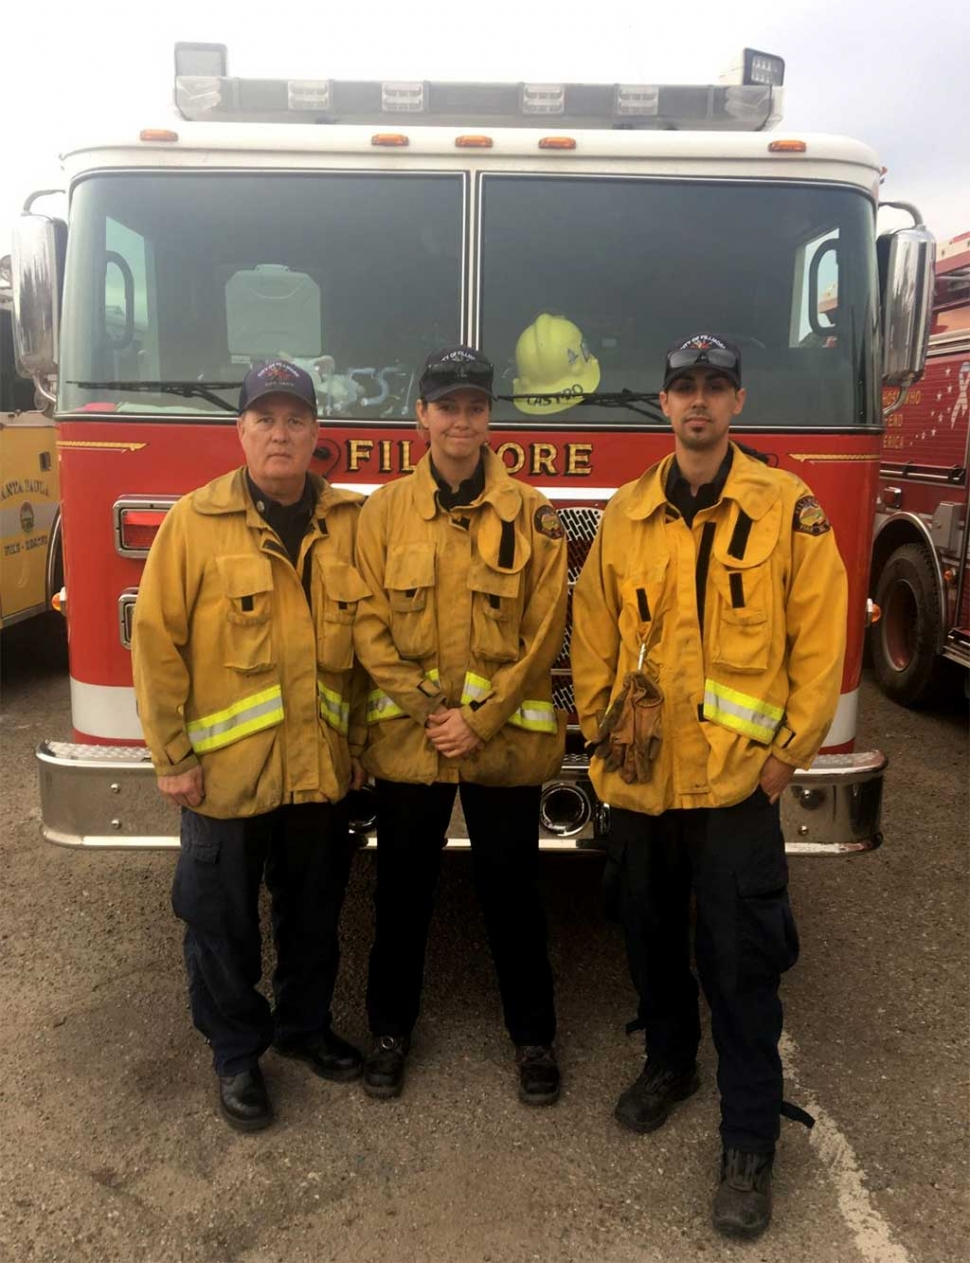 (l-r) Captain Bob Thompson, fire fighters Claire Morgan and Jordan Castro of the Fillmore Fire Department. The team spent 8 day together working on rescue efforts looking for victims as well as searching through debris, houses and the beach as part of a mixed strike team combined with other fire departments.